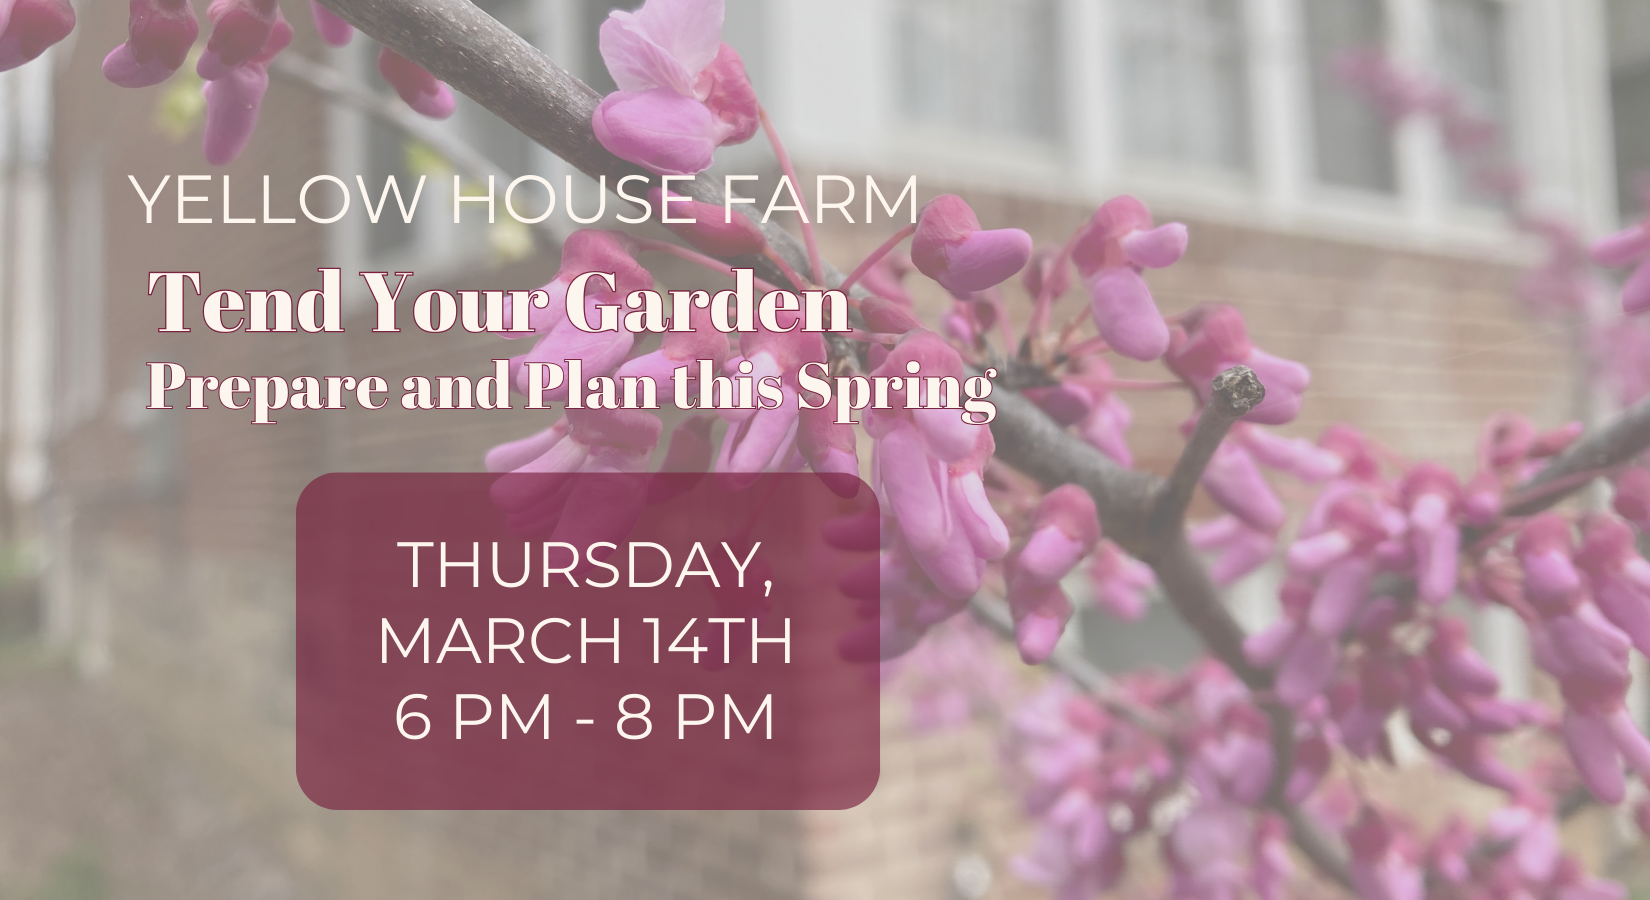 Tend your Garden with Yellow House Farm Workshop Flyer March 14th 6-8pm